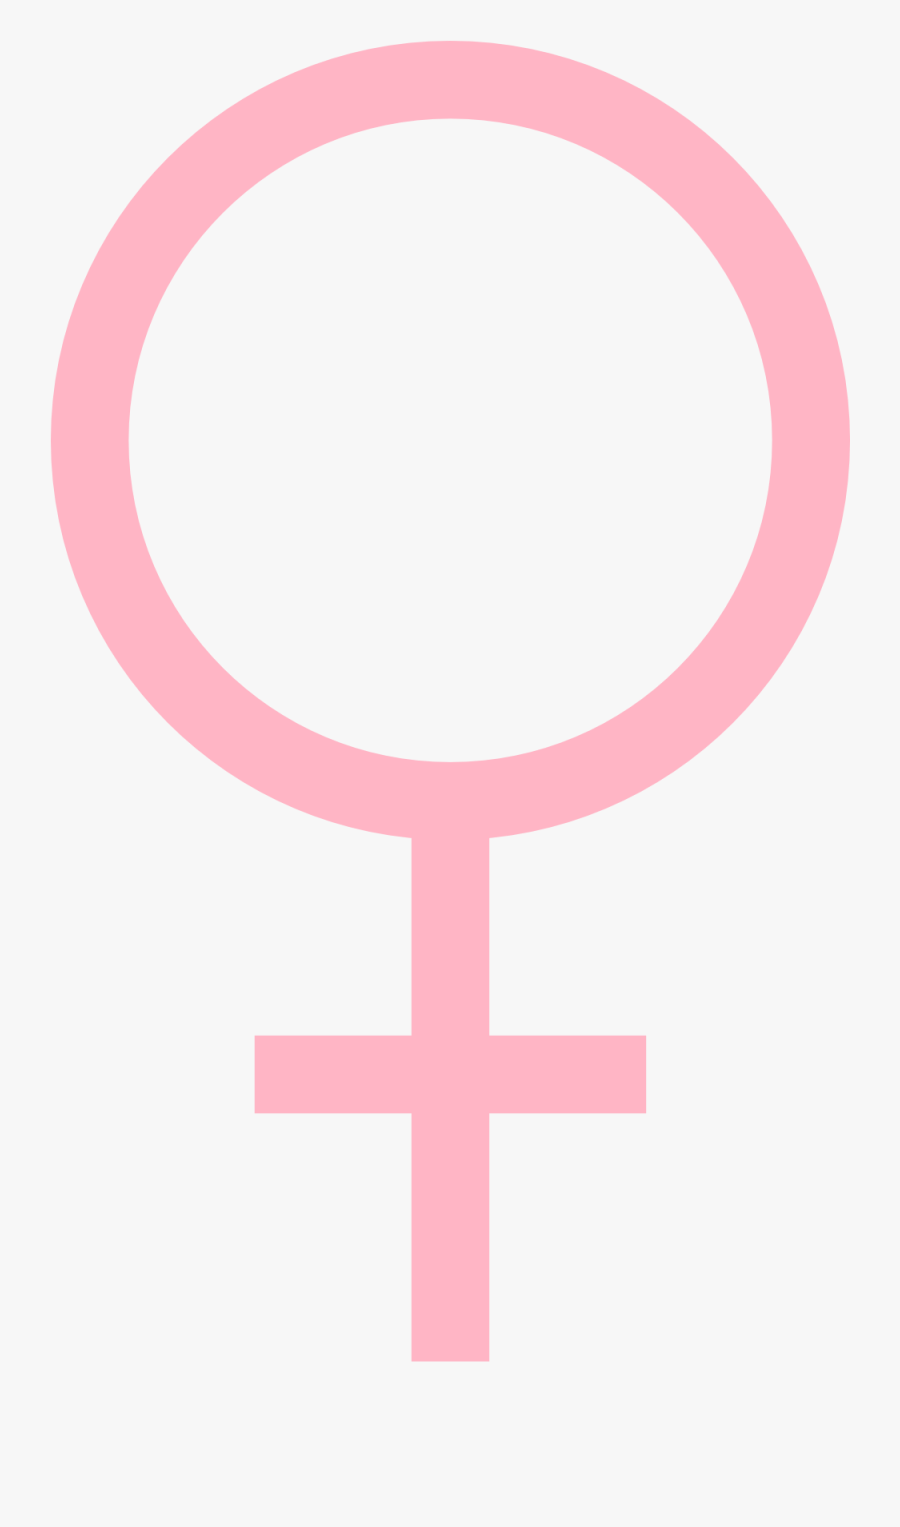 China"s One-child Policy And Its Affects On Maternal - Pink Female Logo Transparent, Transparent Clipart